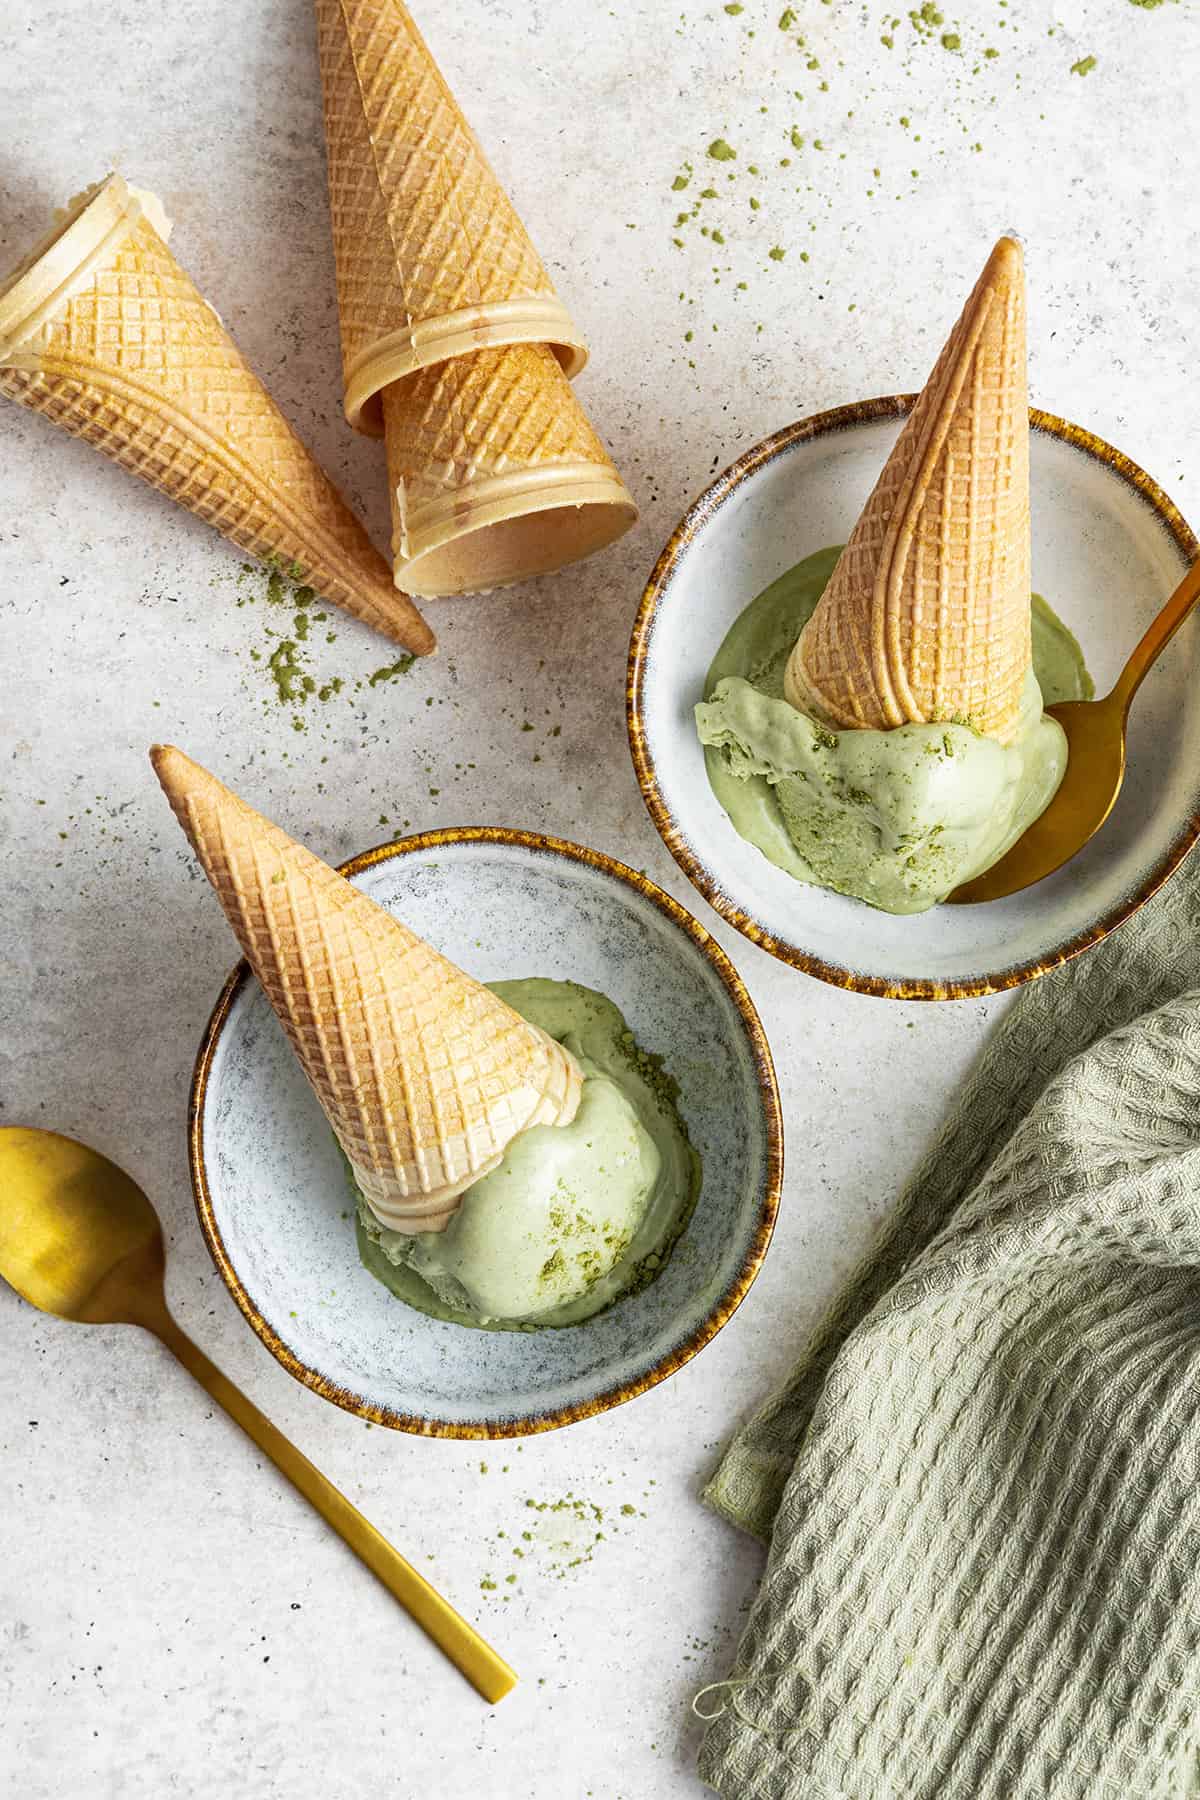 Two ice cream cones with matcha ice cream scoops, face down in bowls, next to a few cones, a spoon, and a kitchen towel